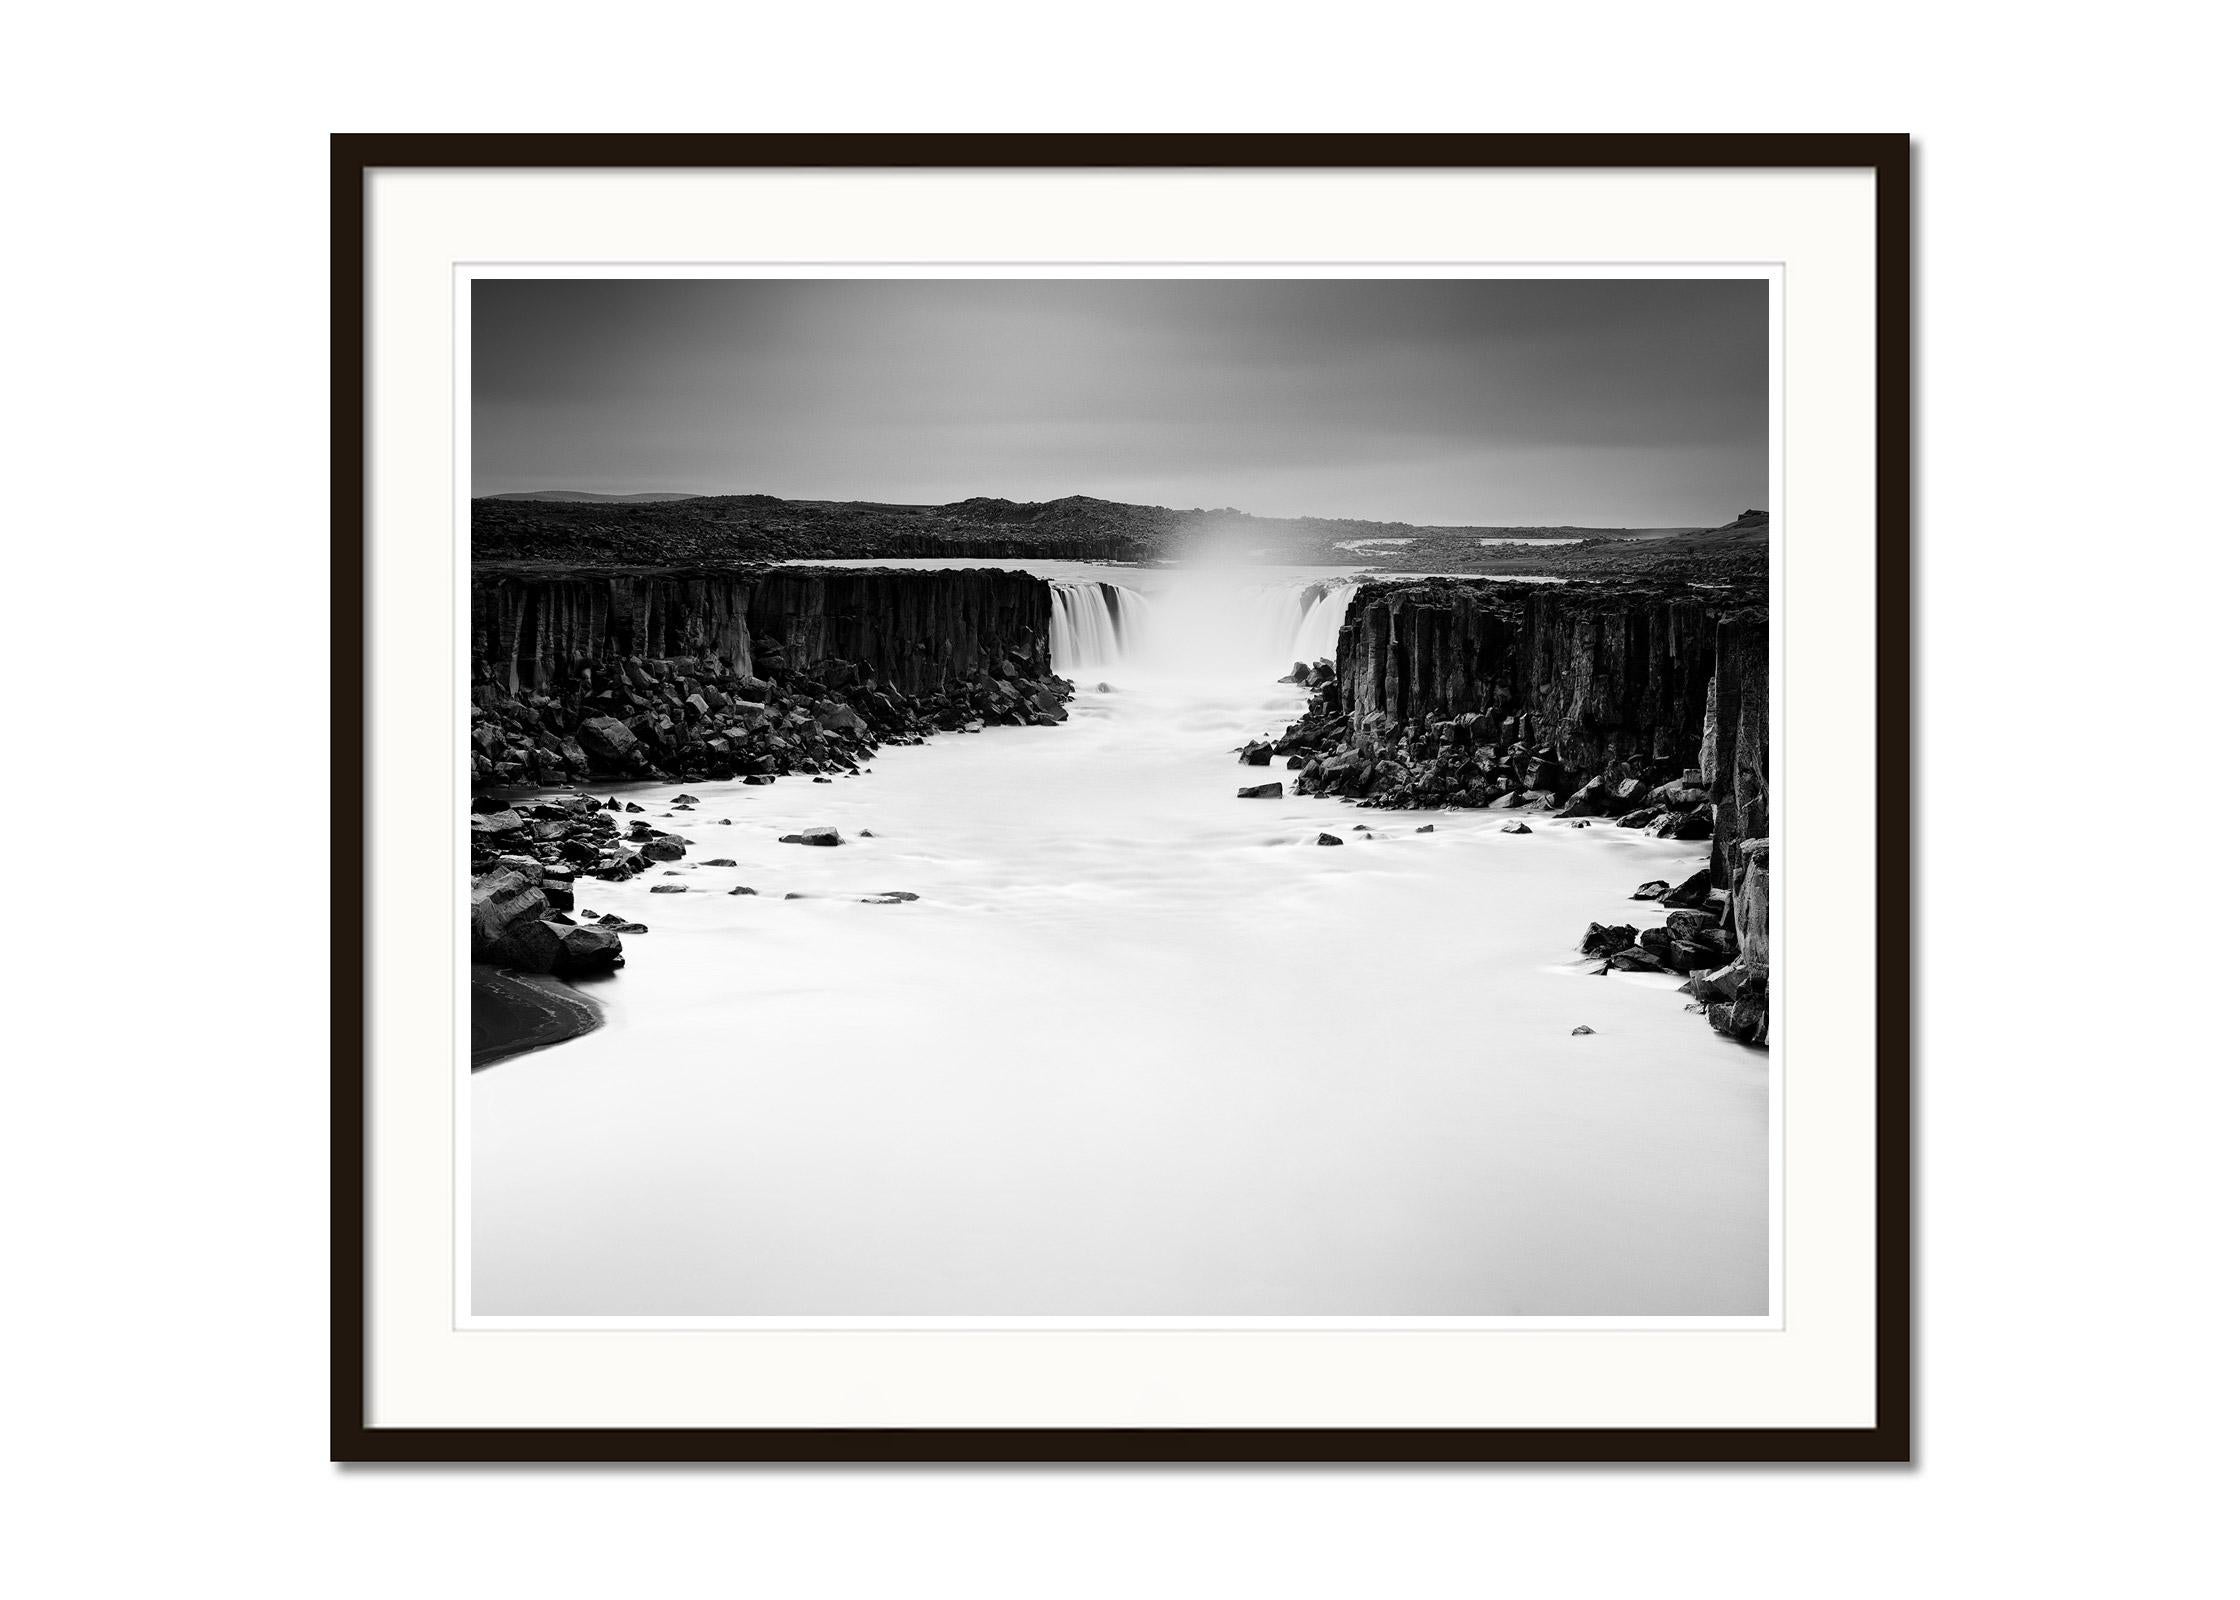 Dettifoss, Waterfall, Iceland, black and white photography, fine art, landscape - Gray Landscape Photograph by Gerald Berghammer